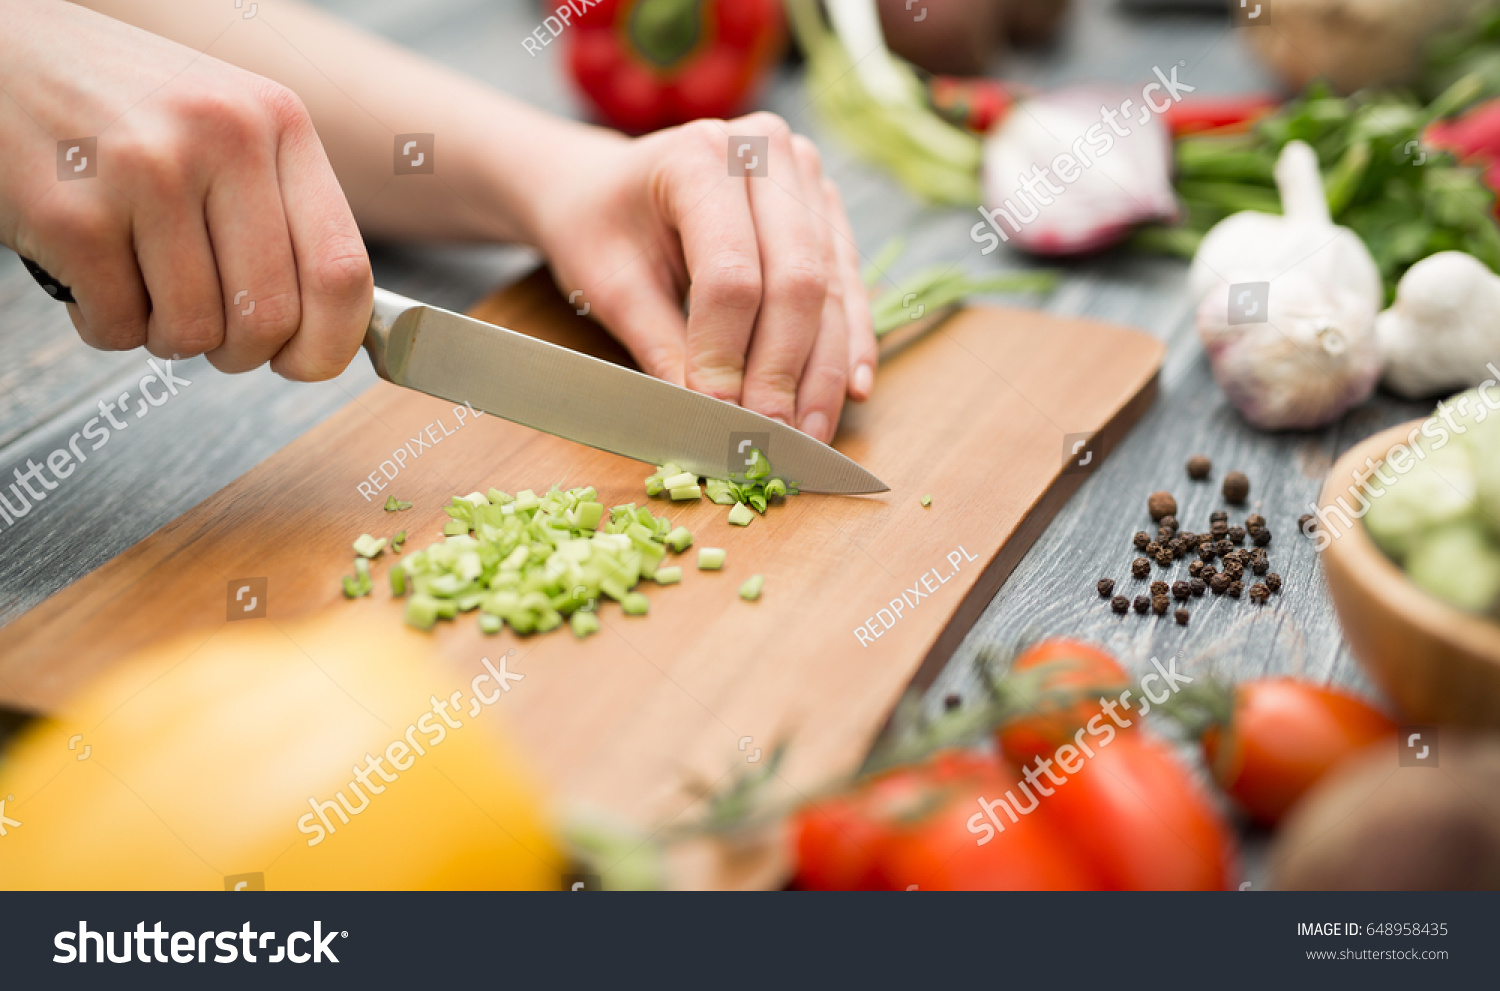 Chef cuts the vegetables into a meal. Preparing dishes. A woman uses a knife and cooks. #648958435